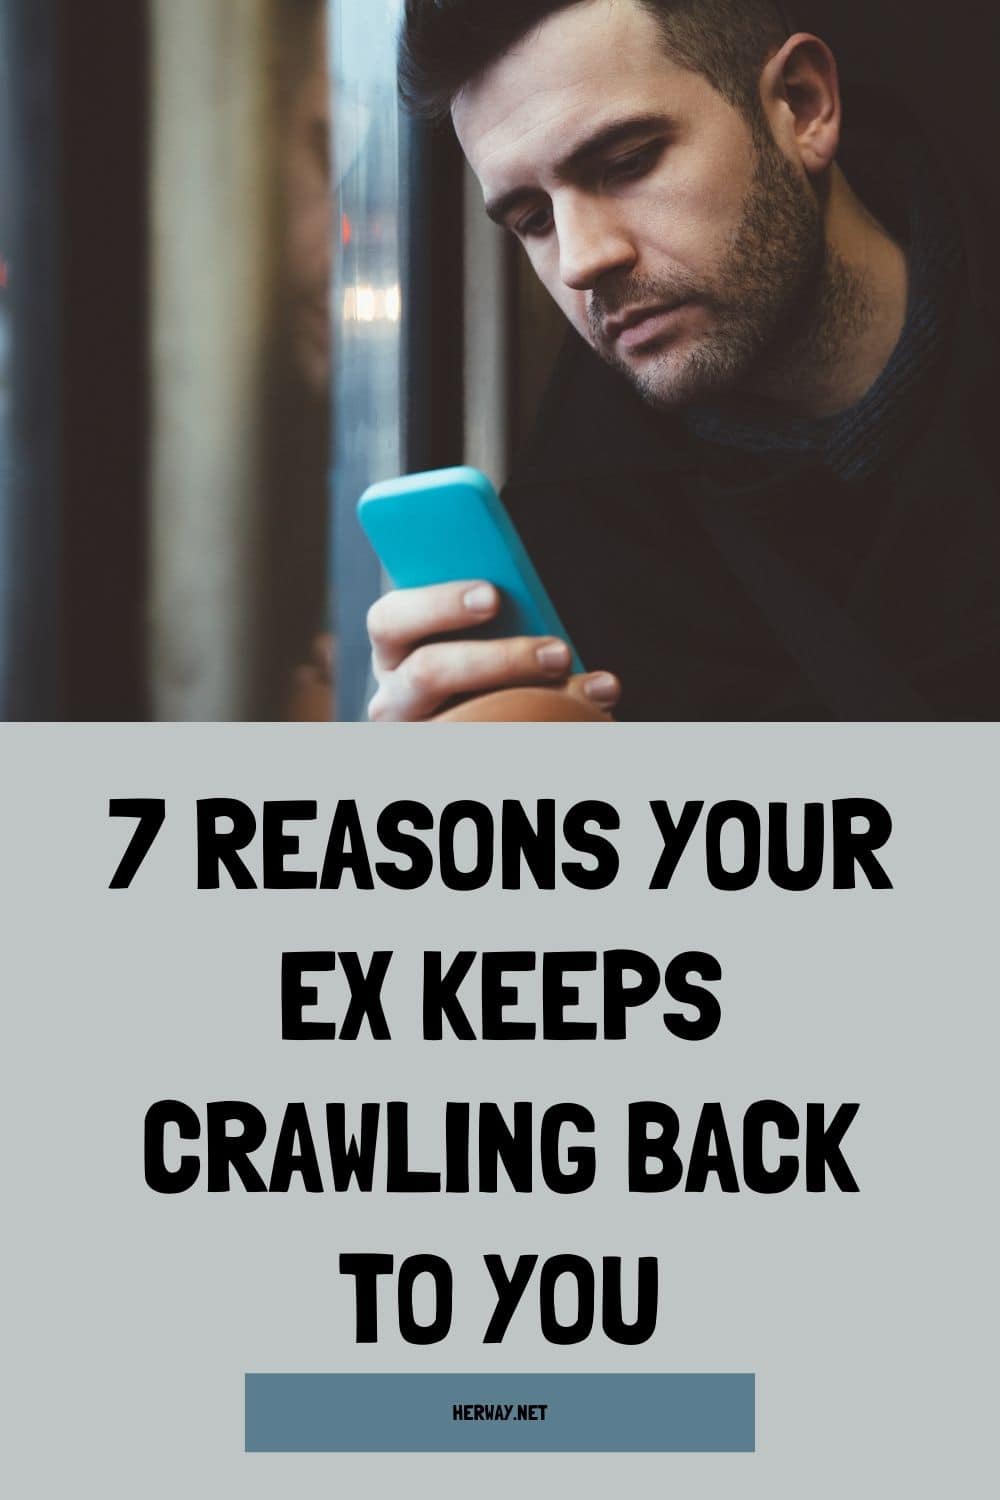 7 Reasons Your Ex Keeps Crawling Back To You